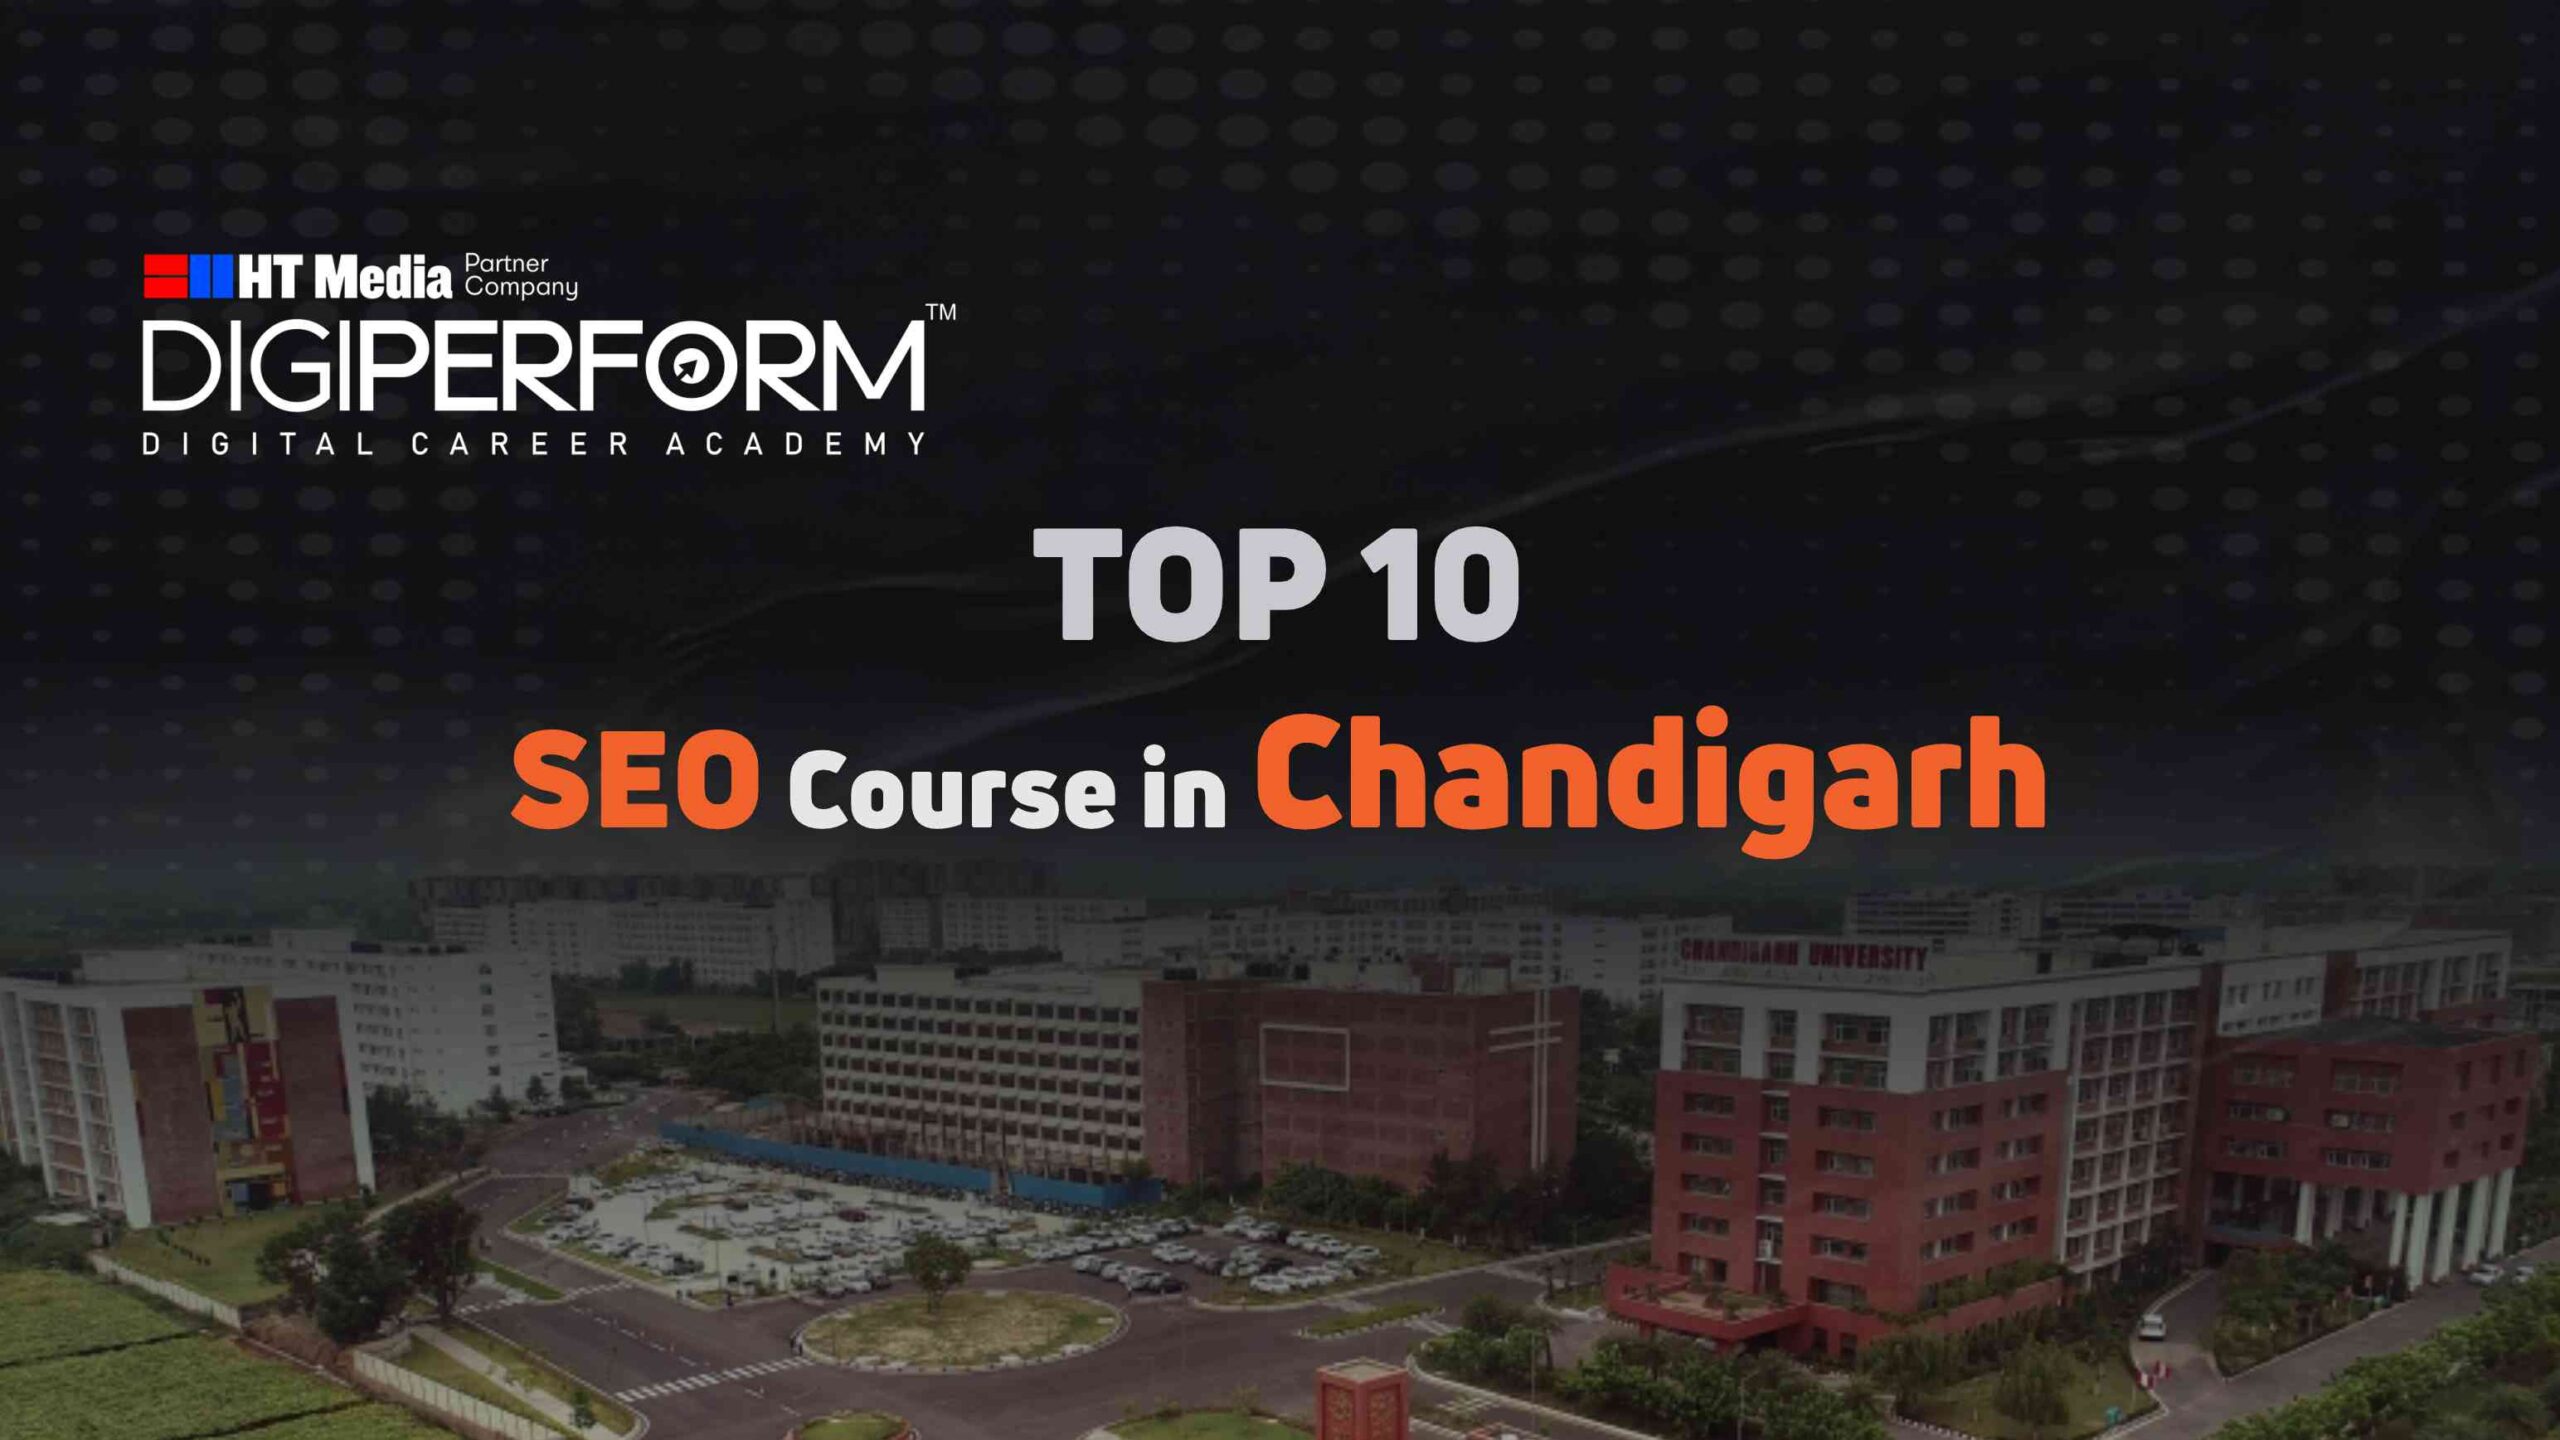 Top 10 SEO Course In Chandigarh